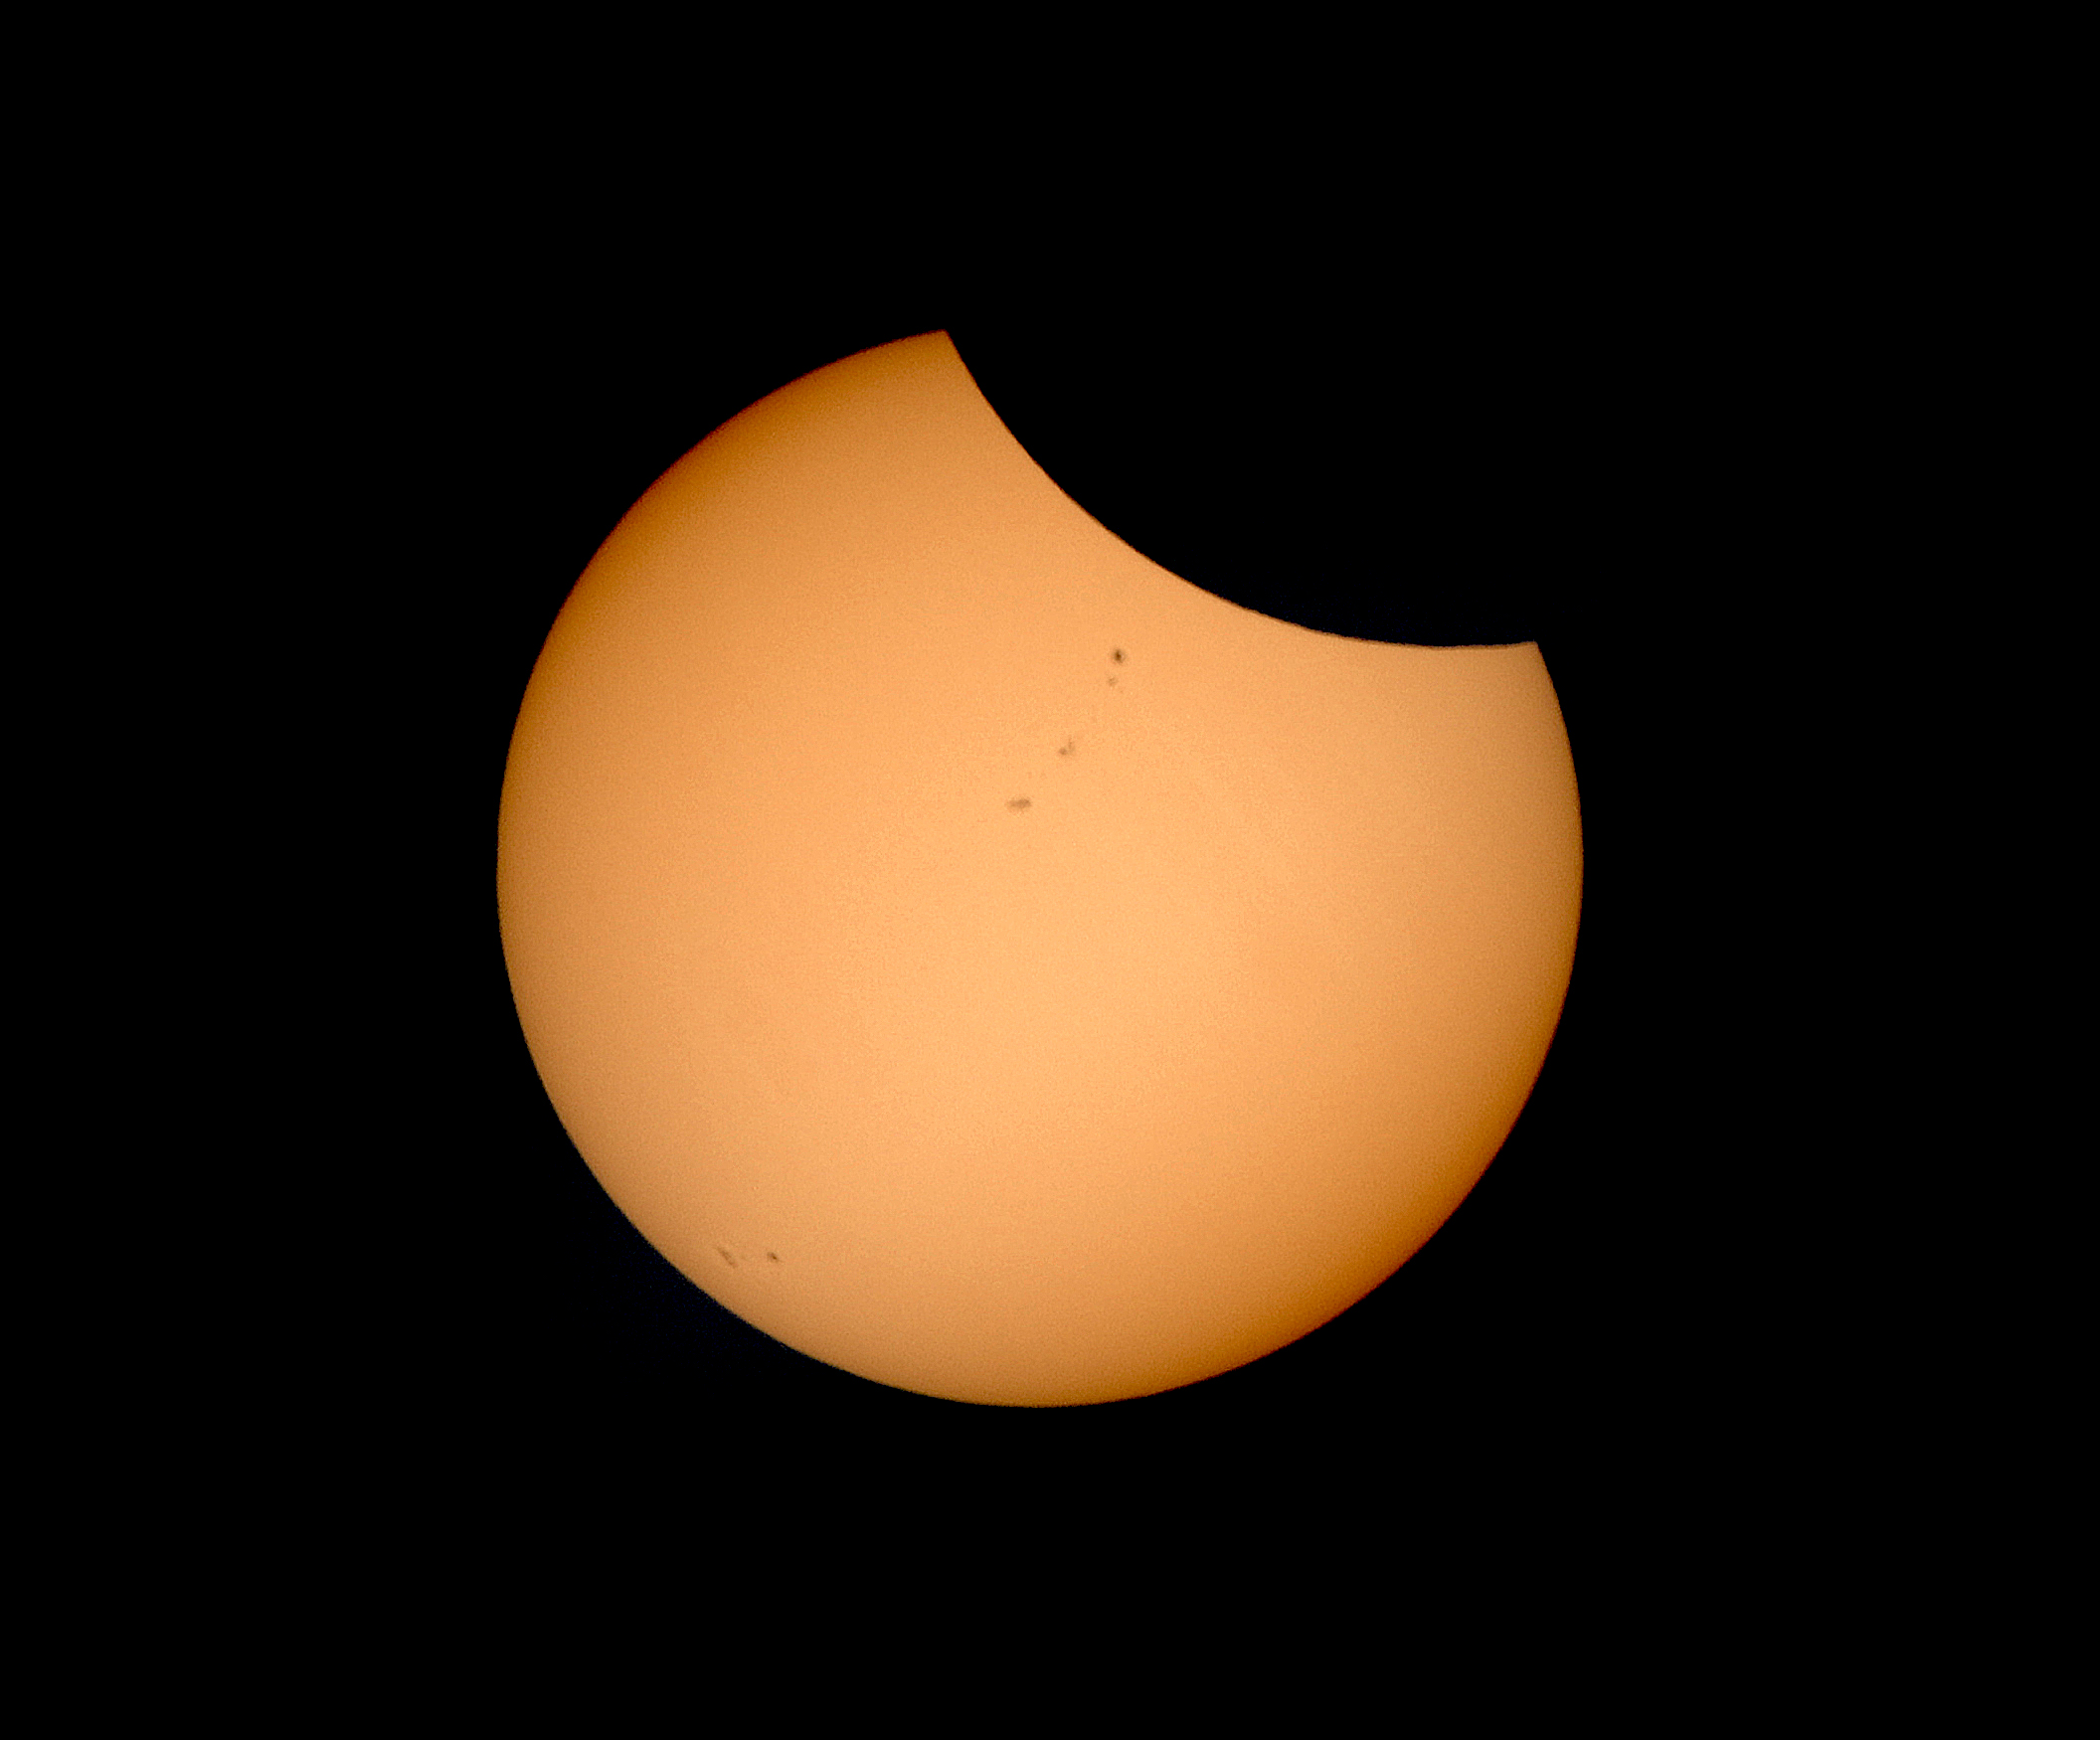 The moon beginning to eclipse the sun during the 2017 partial solar eclipse